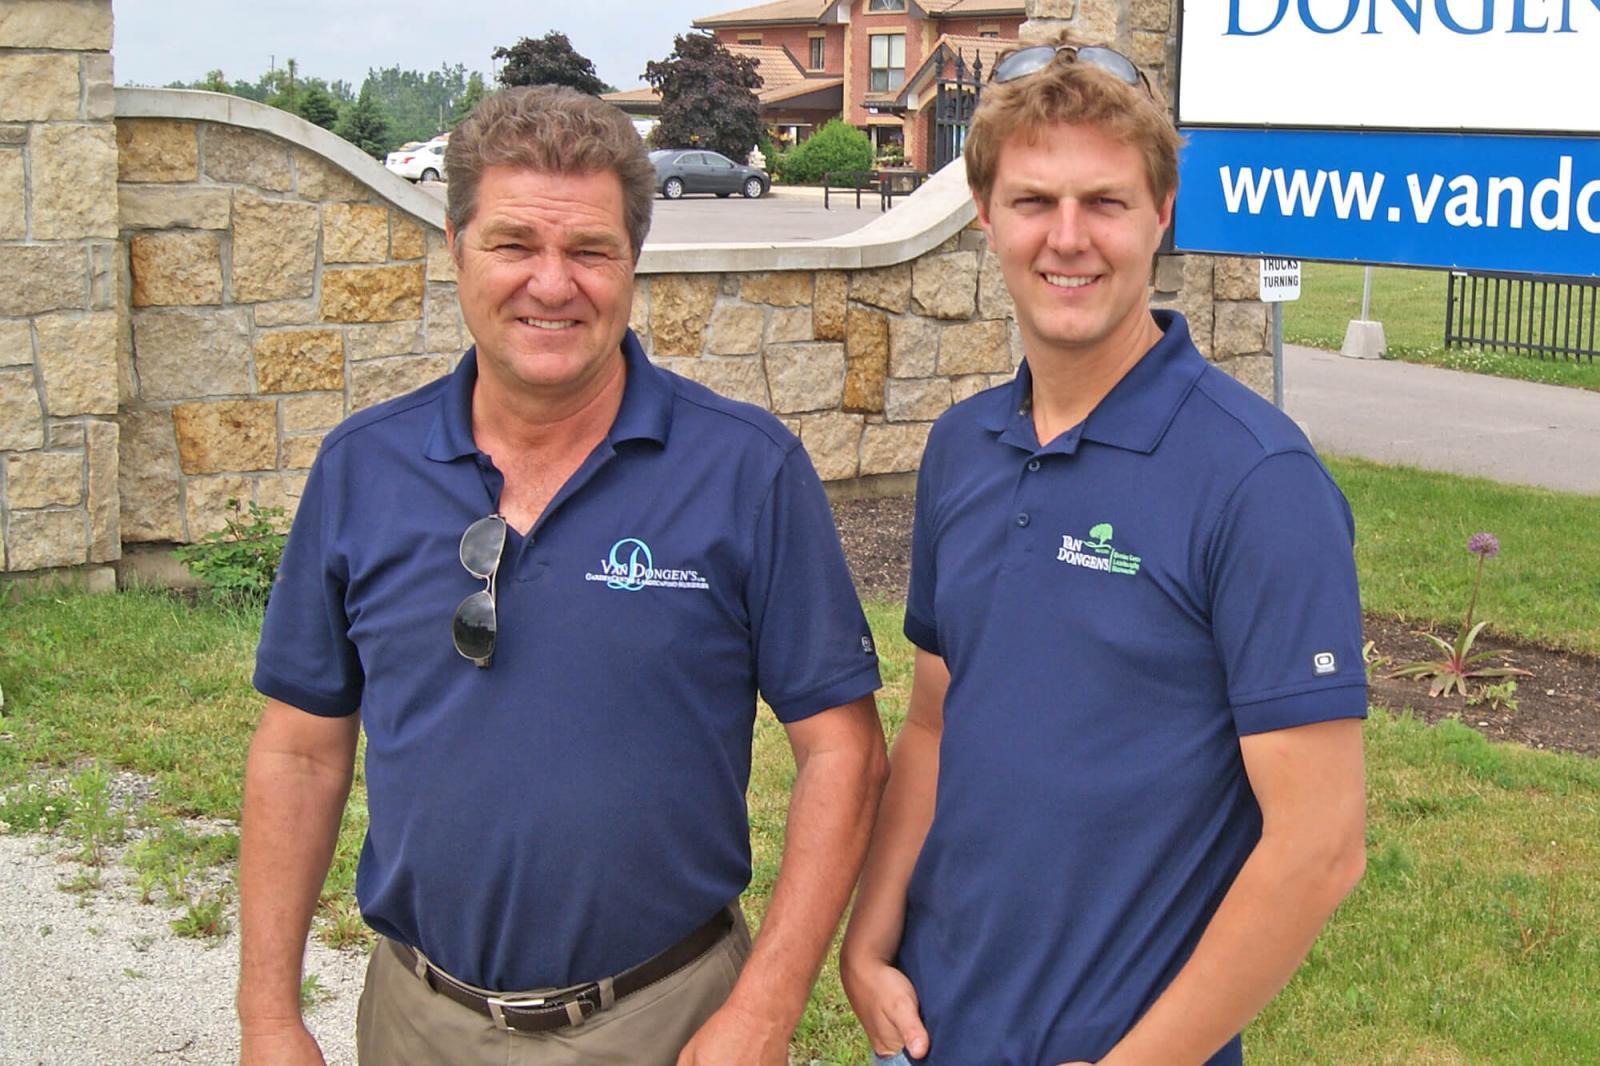 Van Dongen family business improves with each generation